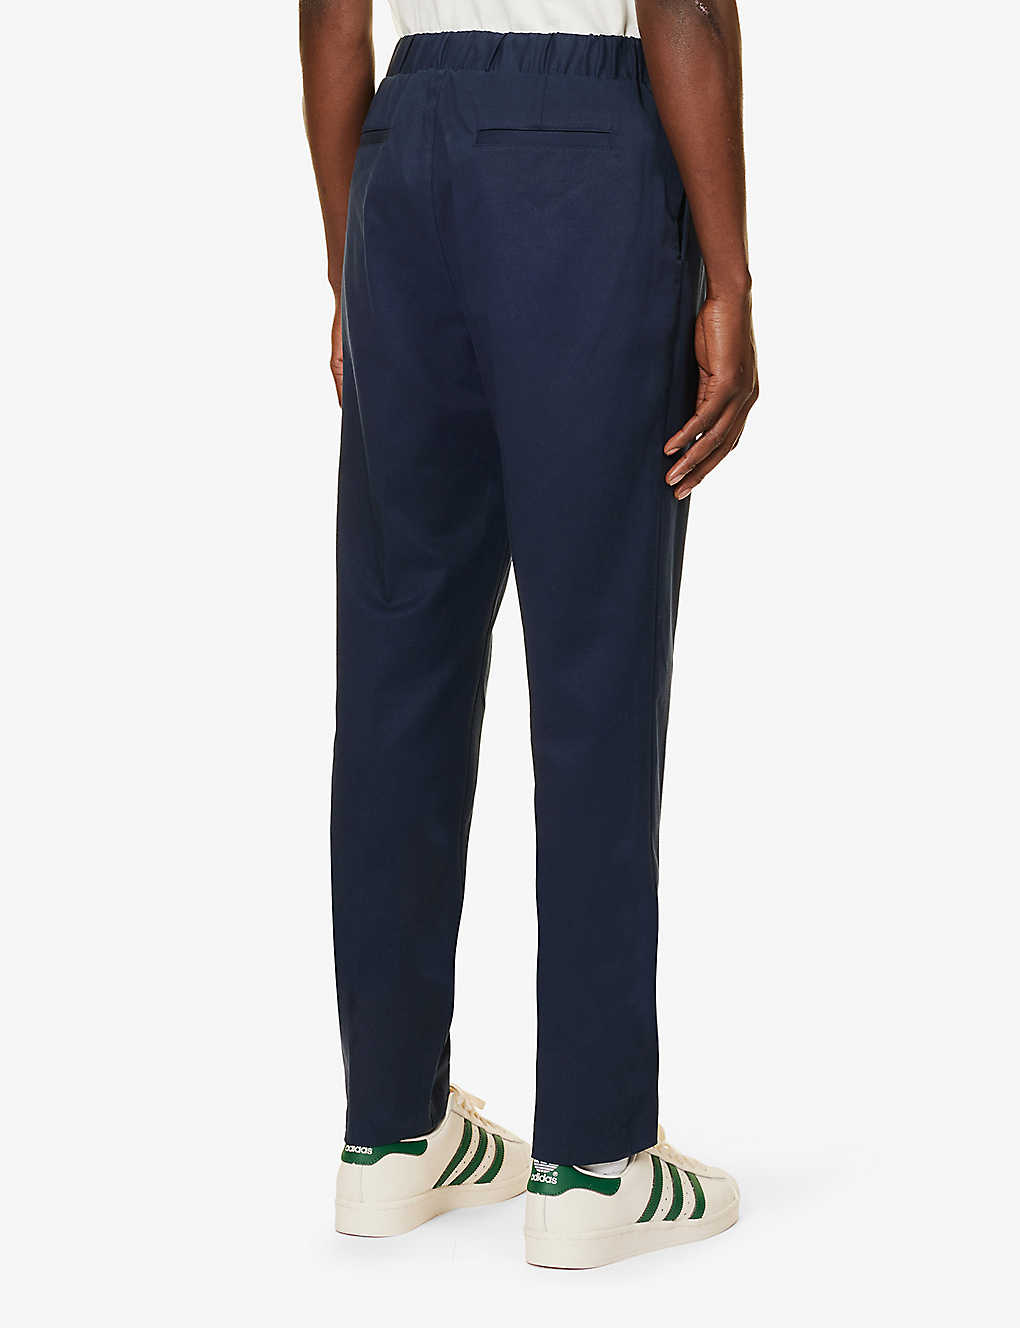 PAIGE - SNIDER PAIGE Elasticated Waistband Tapered Leg Stretch Trousers in Dark Horizon Blue